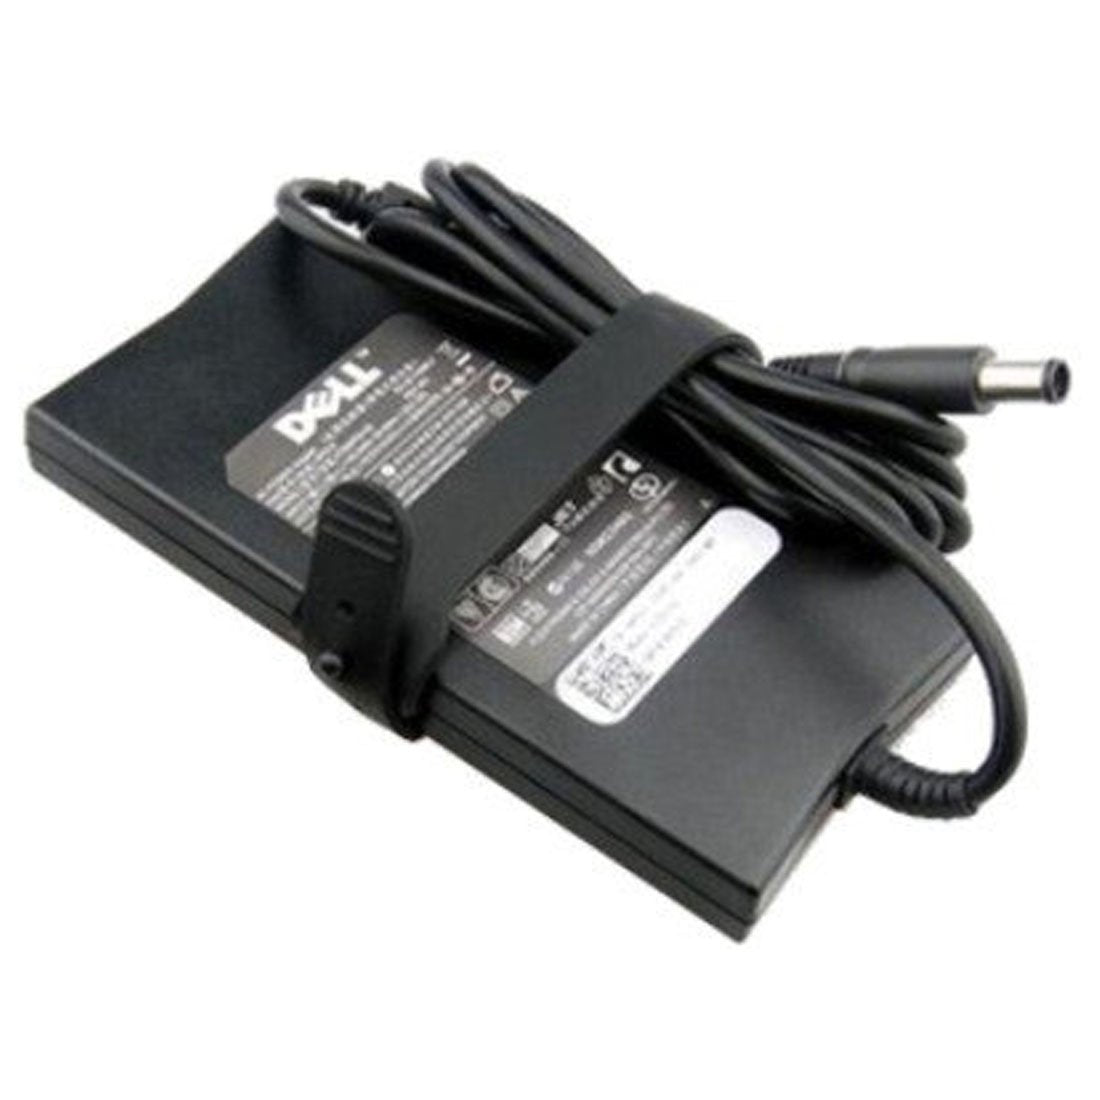 Dell Original 130W 19.5V 7.4mm Pin Laptop Charger Adapter with TPS BIS Certified Power Cable